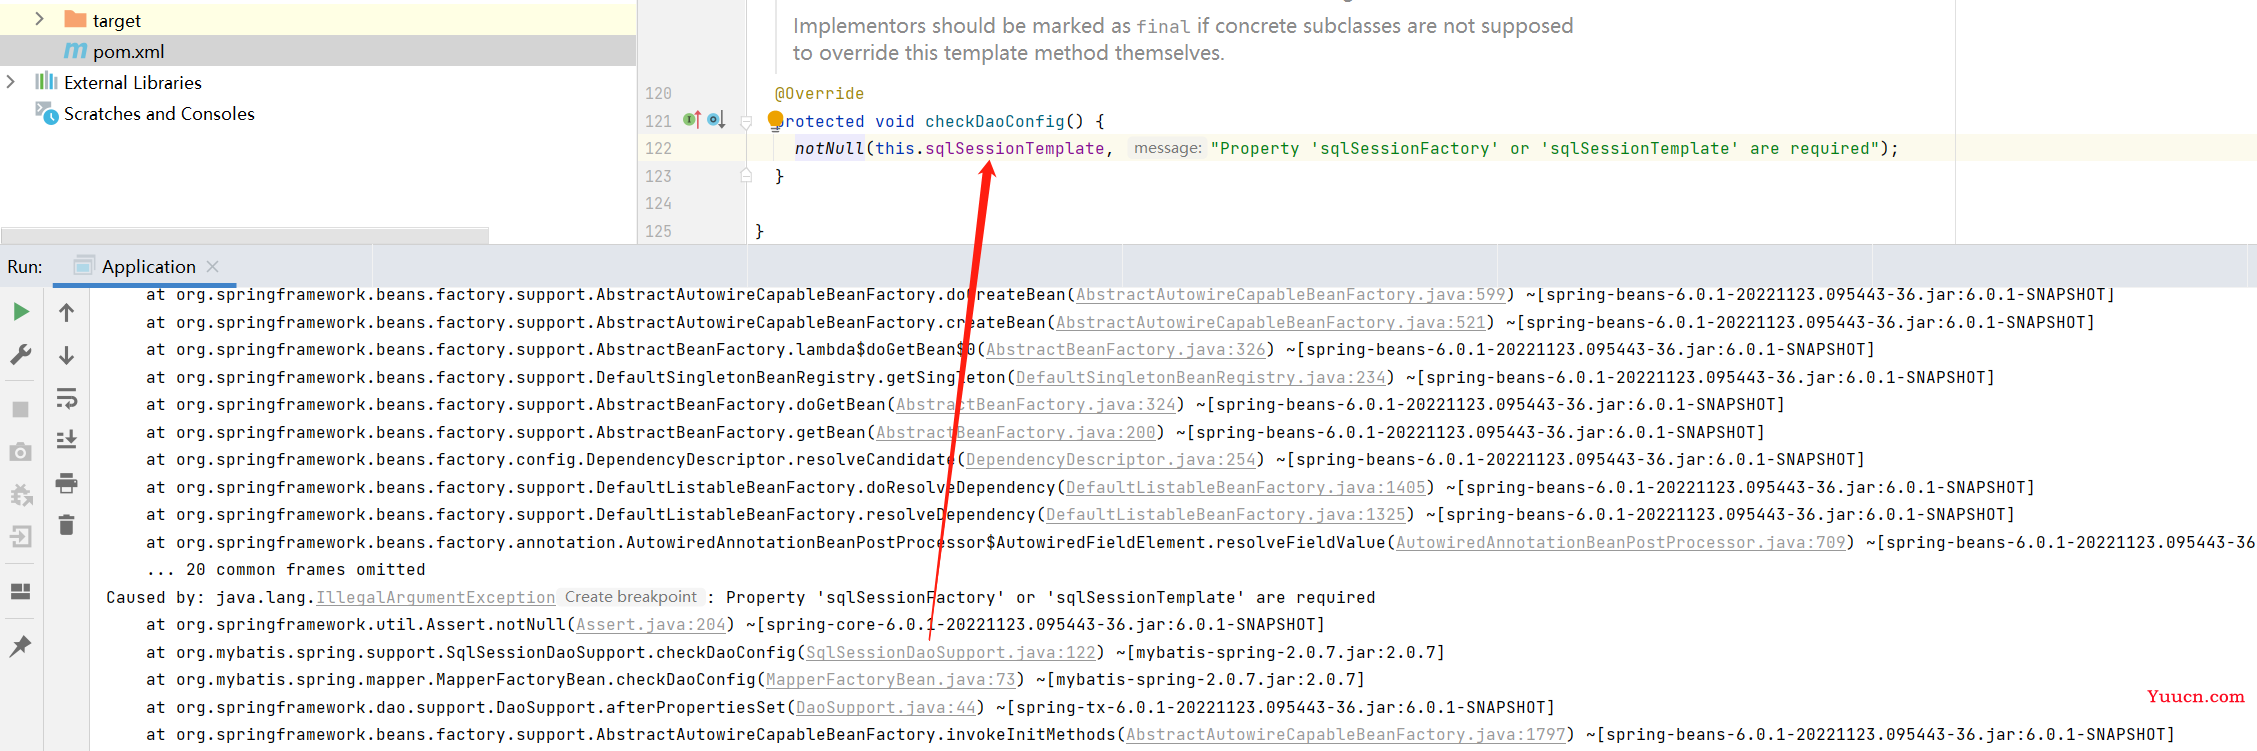 SpringBoot3整合MyBatis报错：Property ‘sqlSessionFactory‘ or ‘sqlSessionTemplate‘ are required